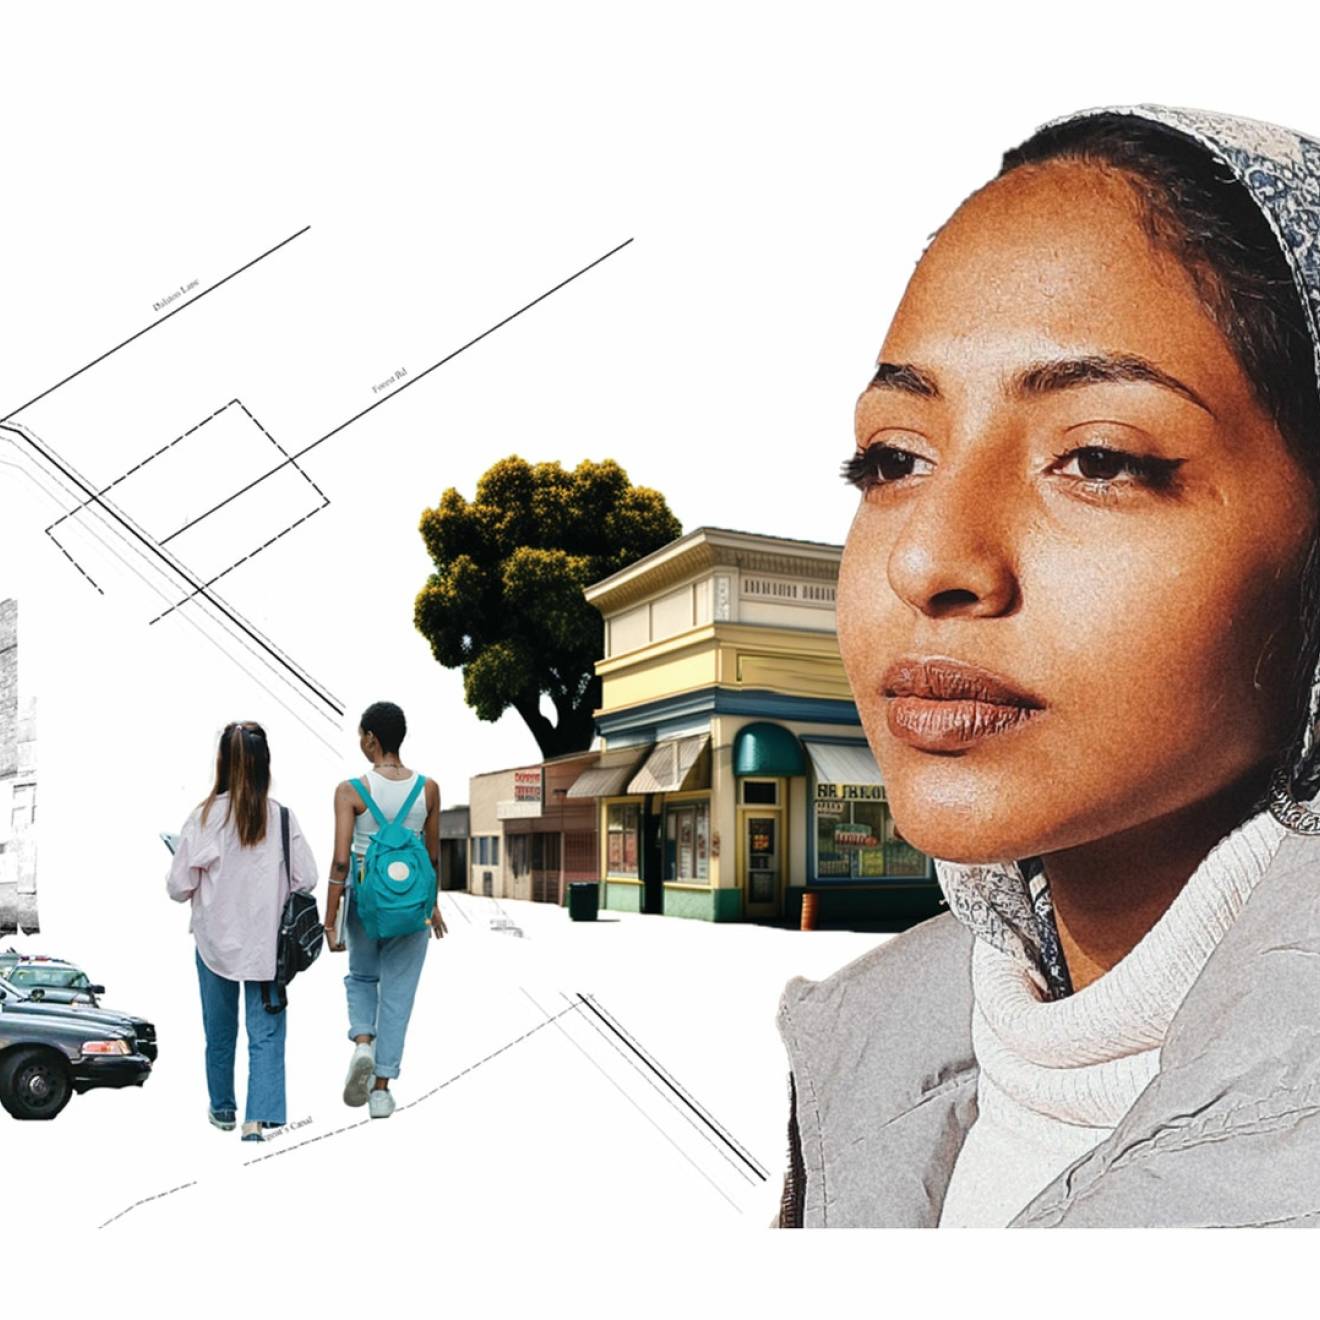 Photo illustration showing young women in Oakland